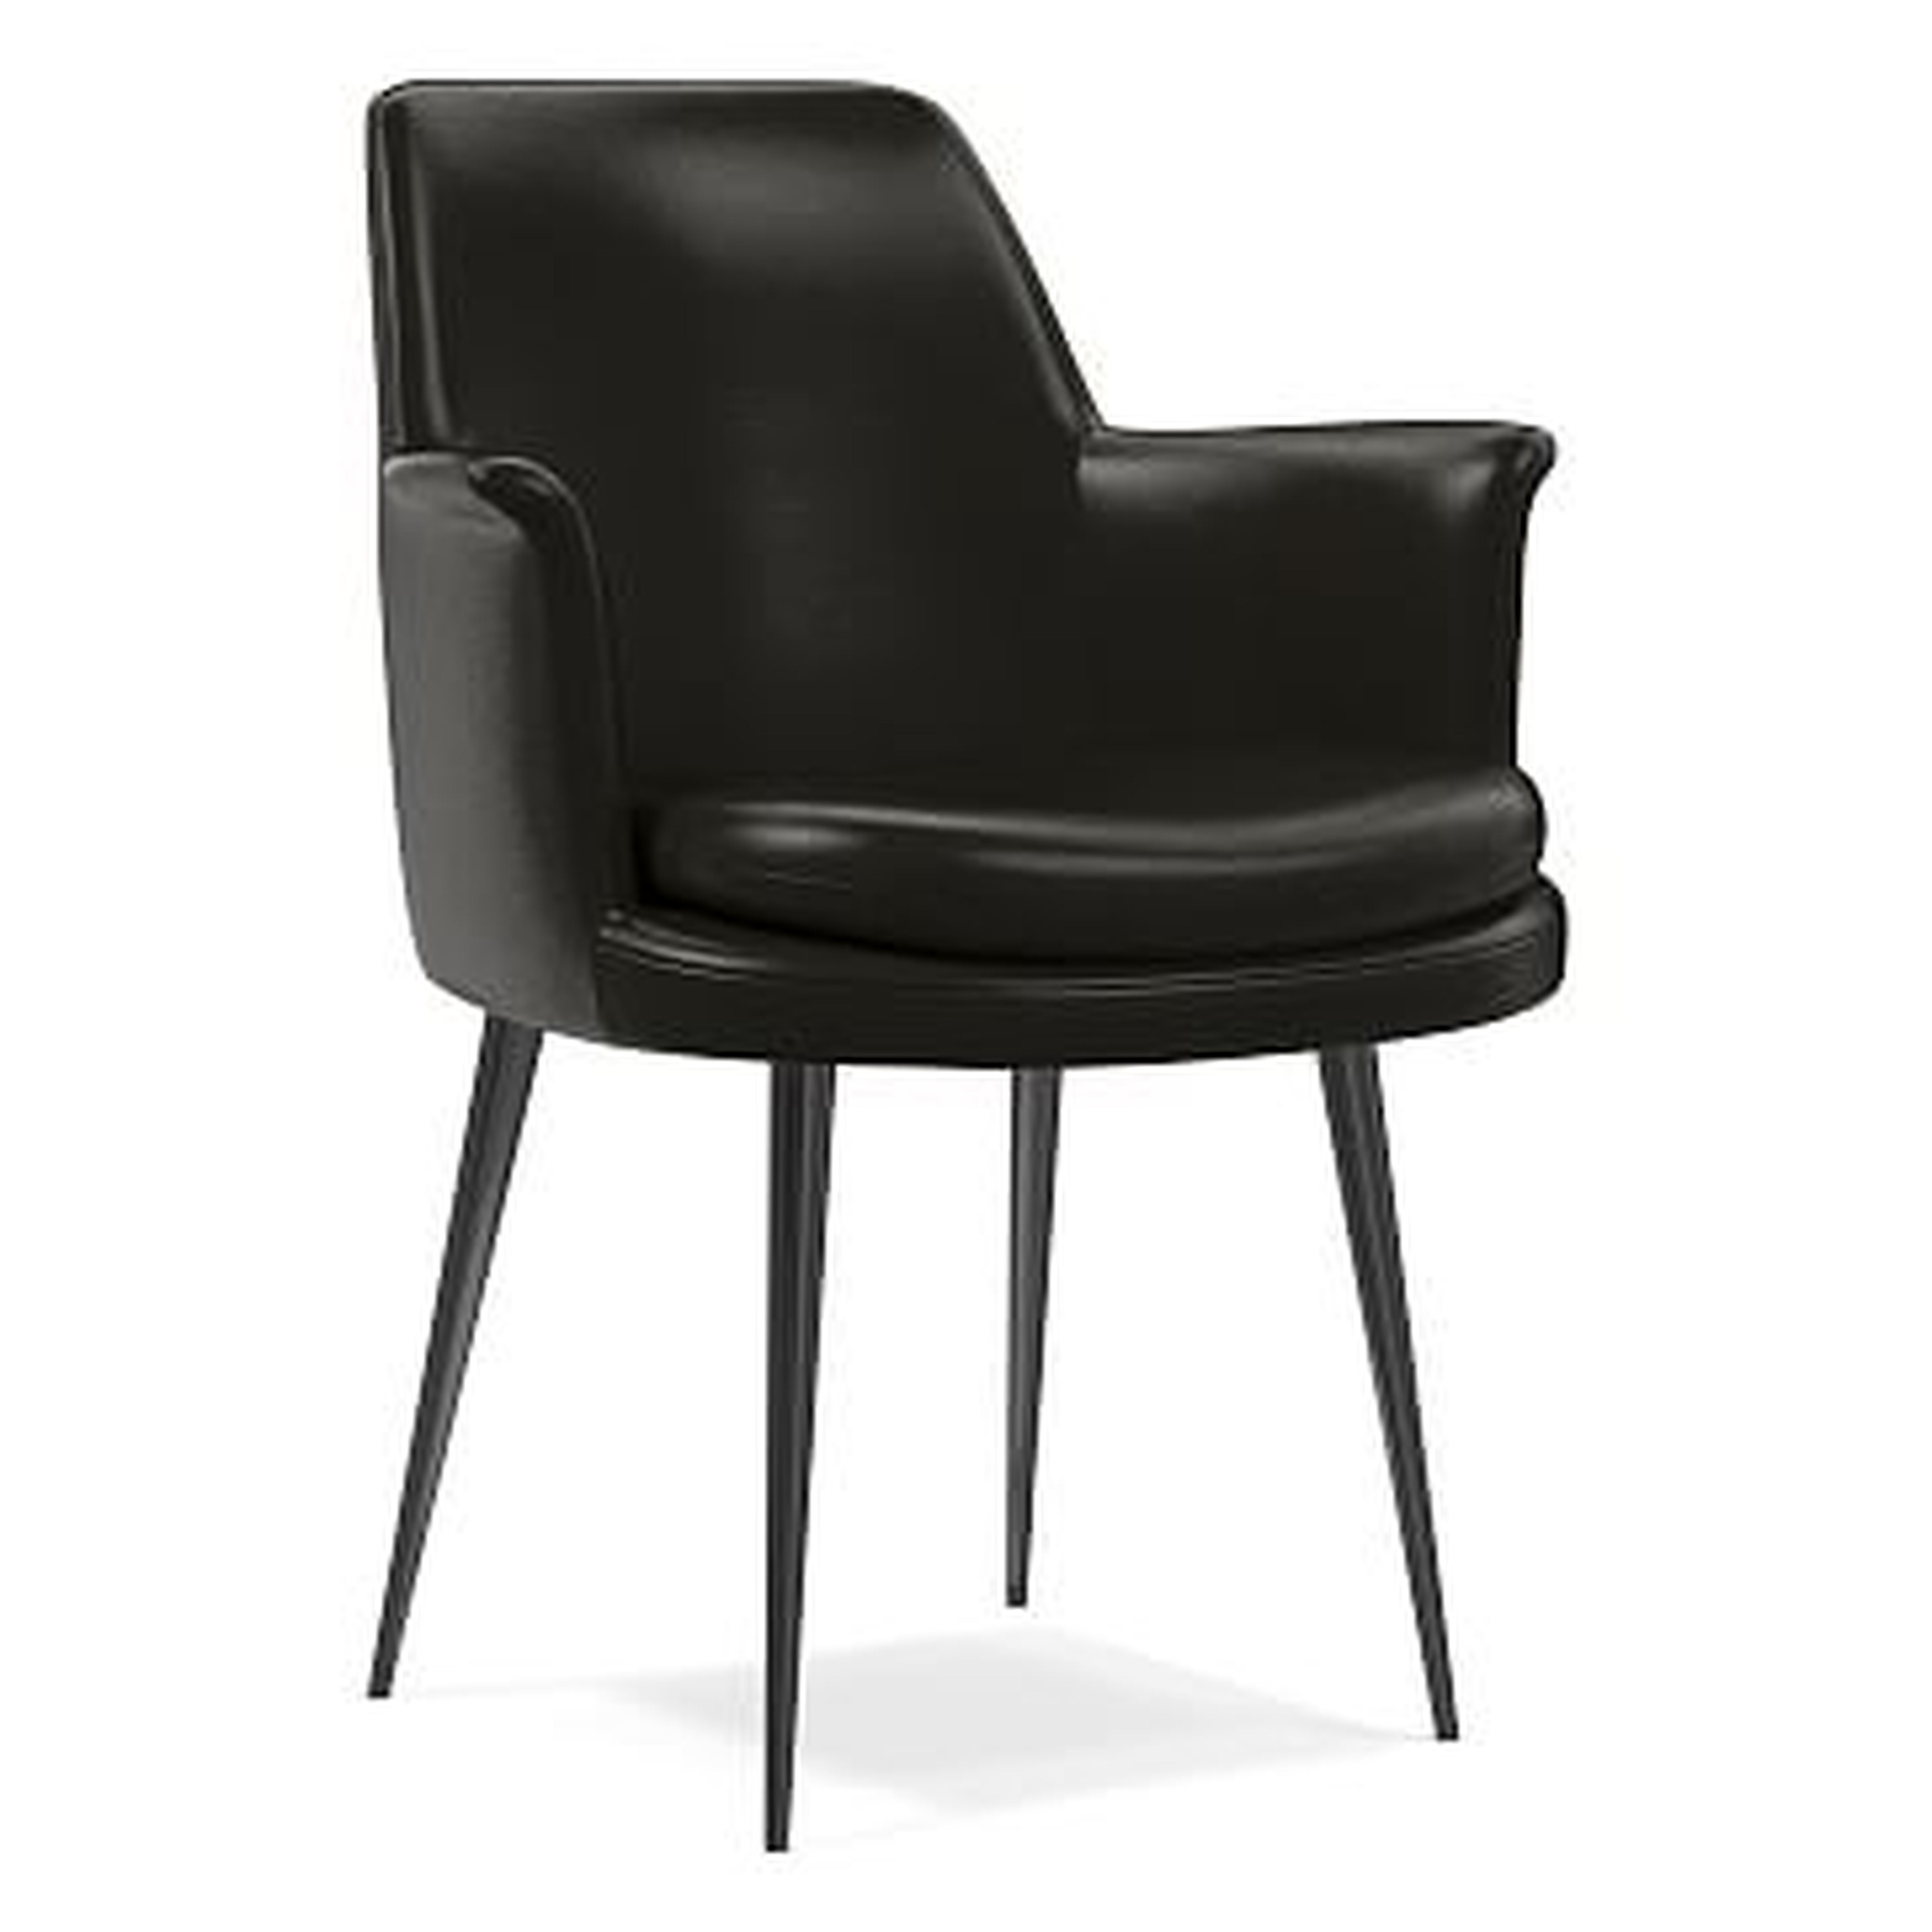 Finley Wing Dining Chair, Parc Leather, Black, Gunmetal - West Elm